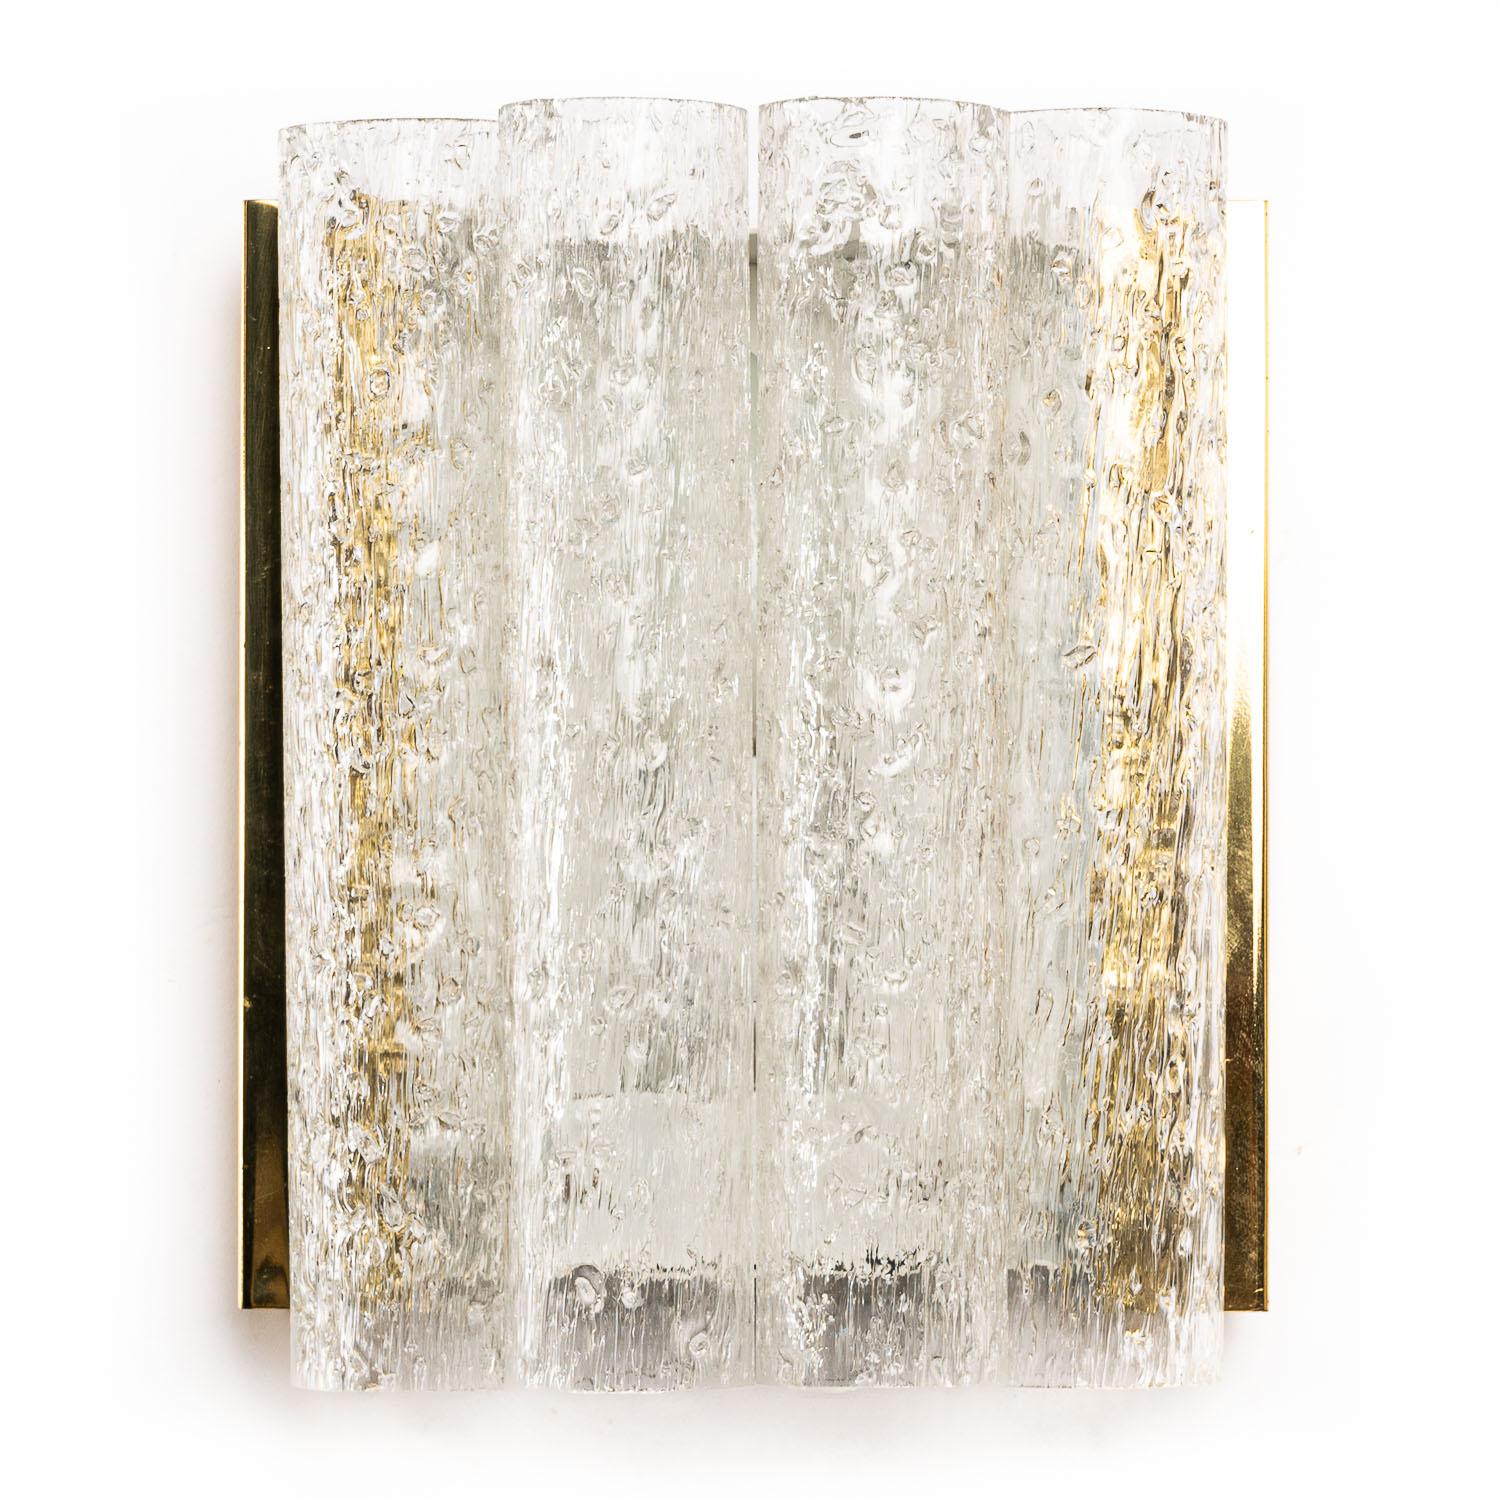 If you like vintage lighting then you will love this Doria glass sconces. Designed with four vertical tubes within brass frame work sides and metal centre, it's a highly distinctive piece and looks stunning when illuminated. Authenticity is